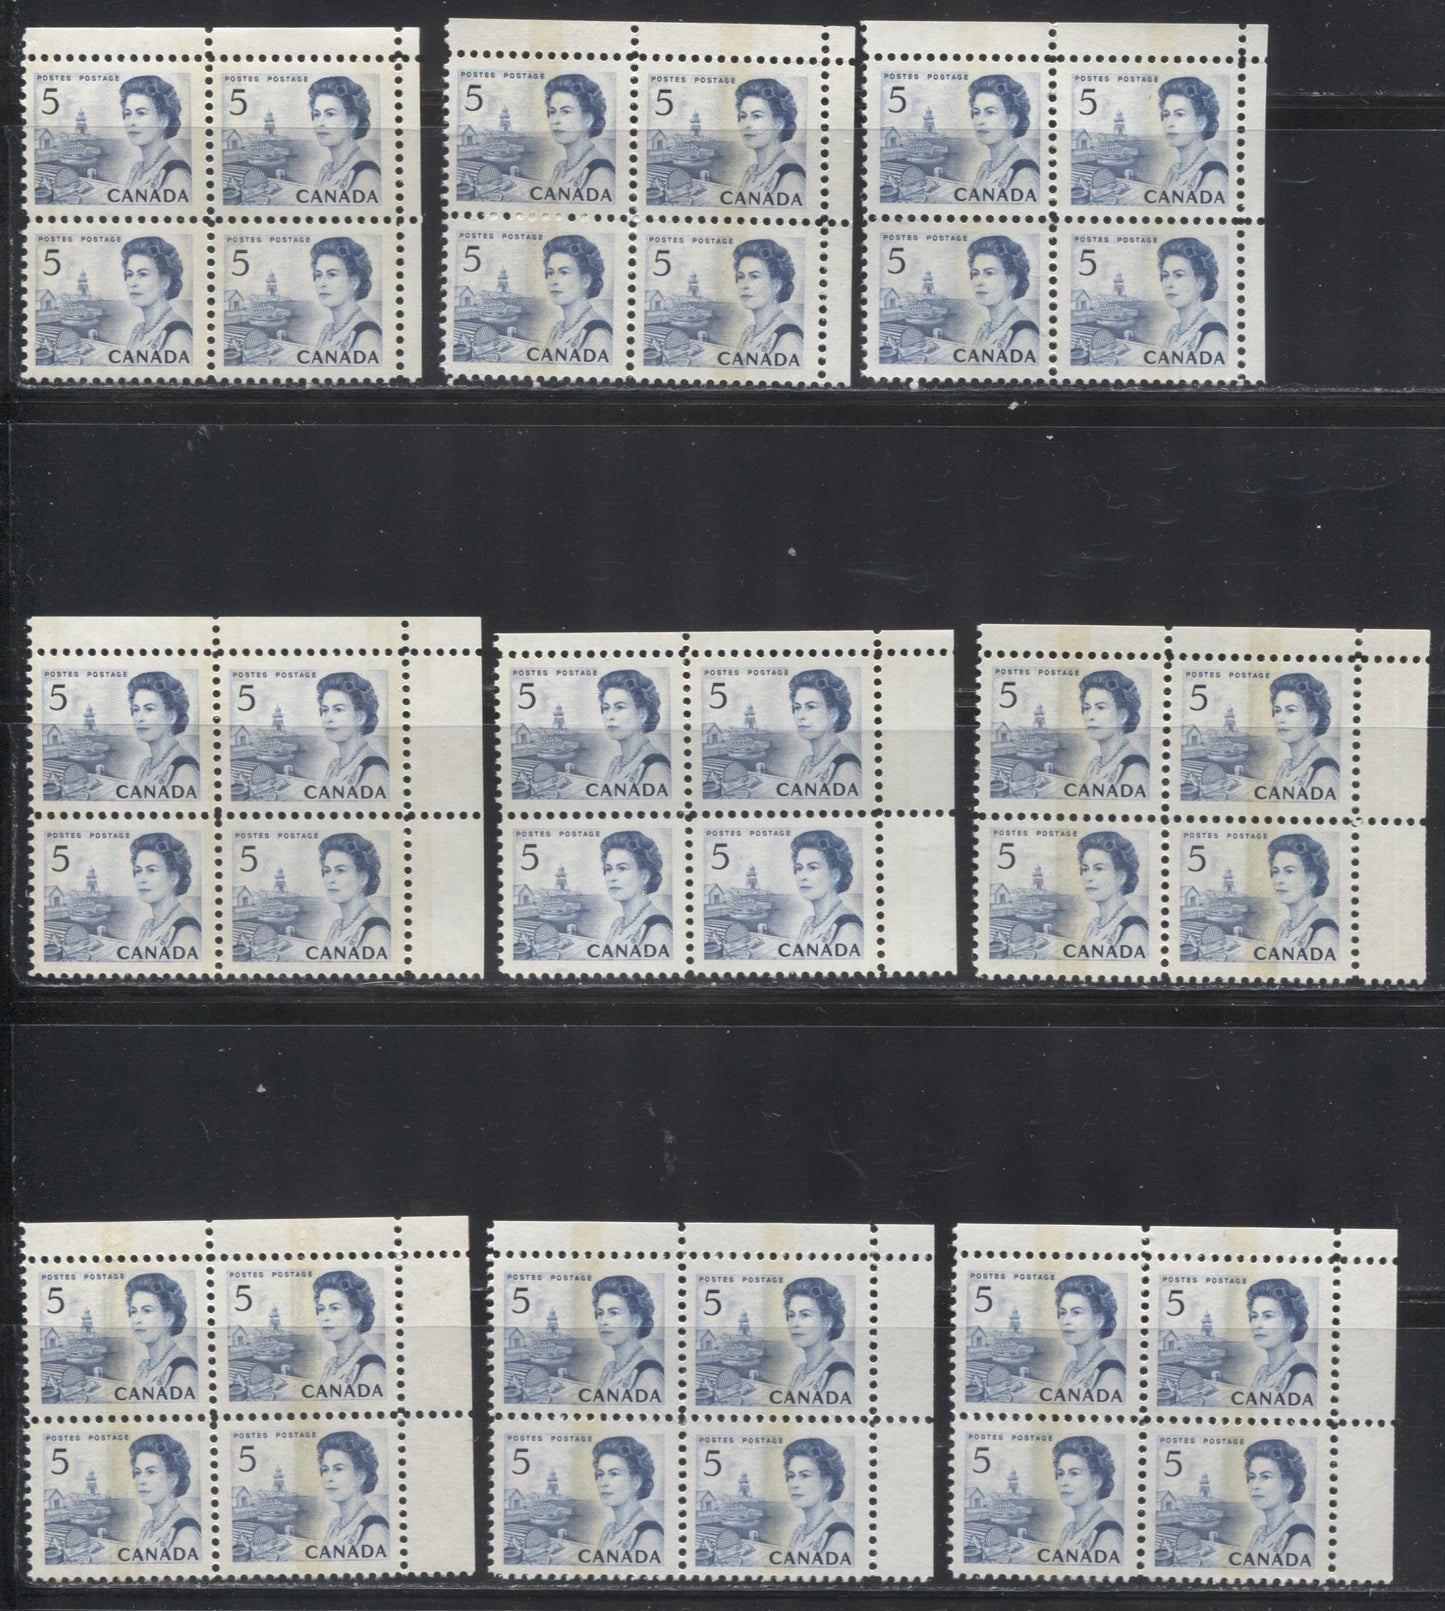 Lot 196 Canada #458p-459piii 5c Deep Blue Atlantic Fishing Village, 1967-1973 Centennial Definitive Issue, Upper Right Tagged Corner Blocks, A Specialized VFNH Group of 9 Blocks on Different Papers, Different Shades and Different Gums